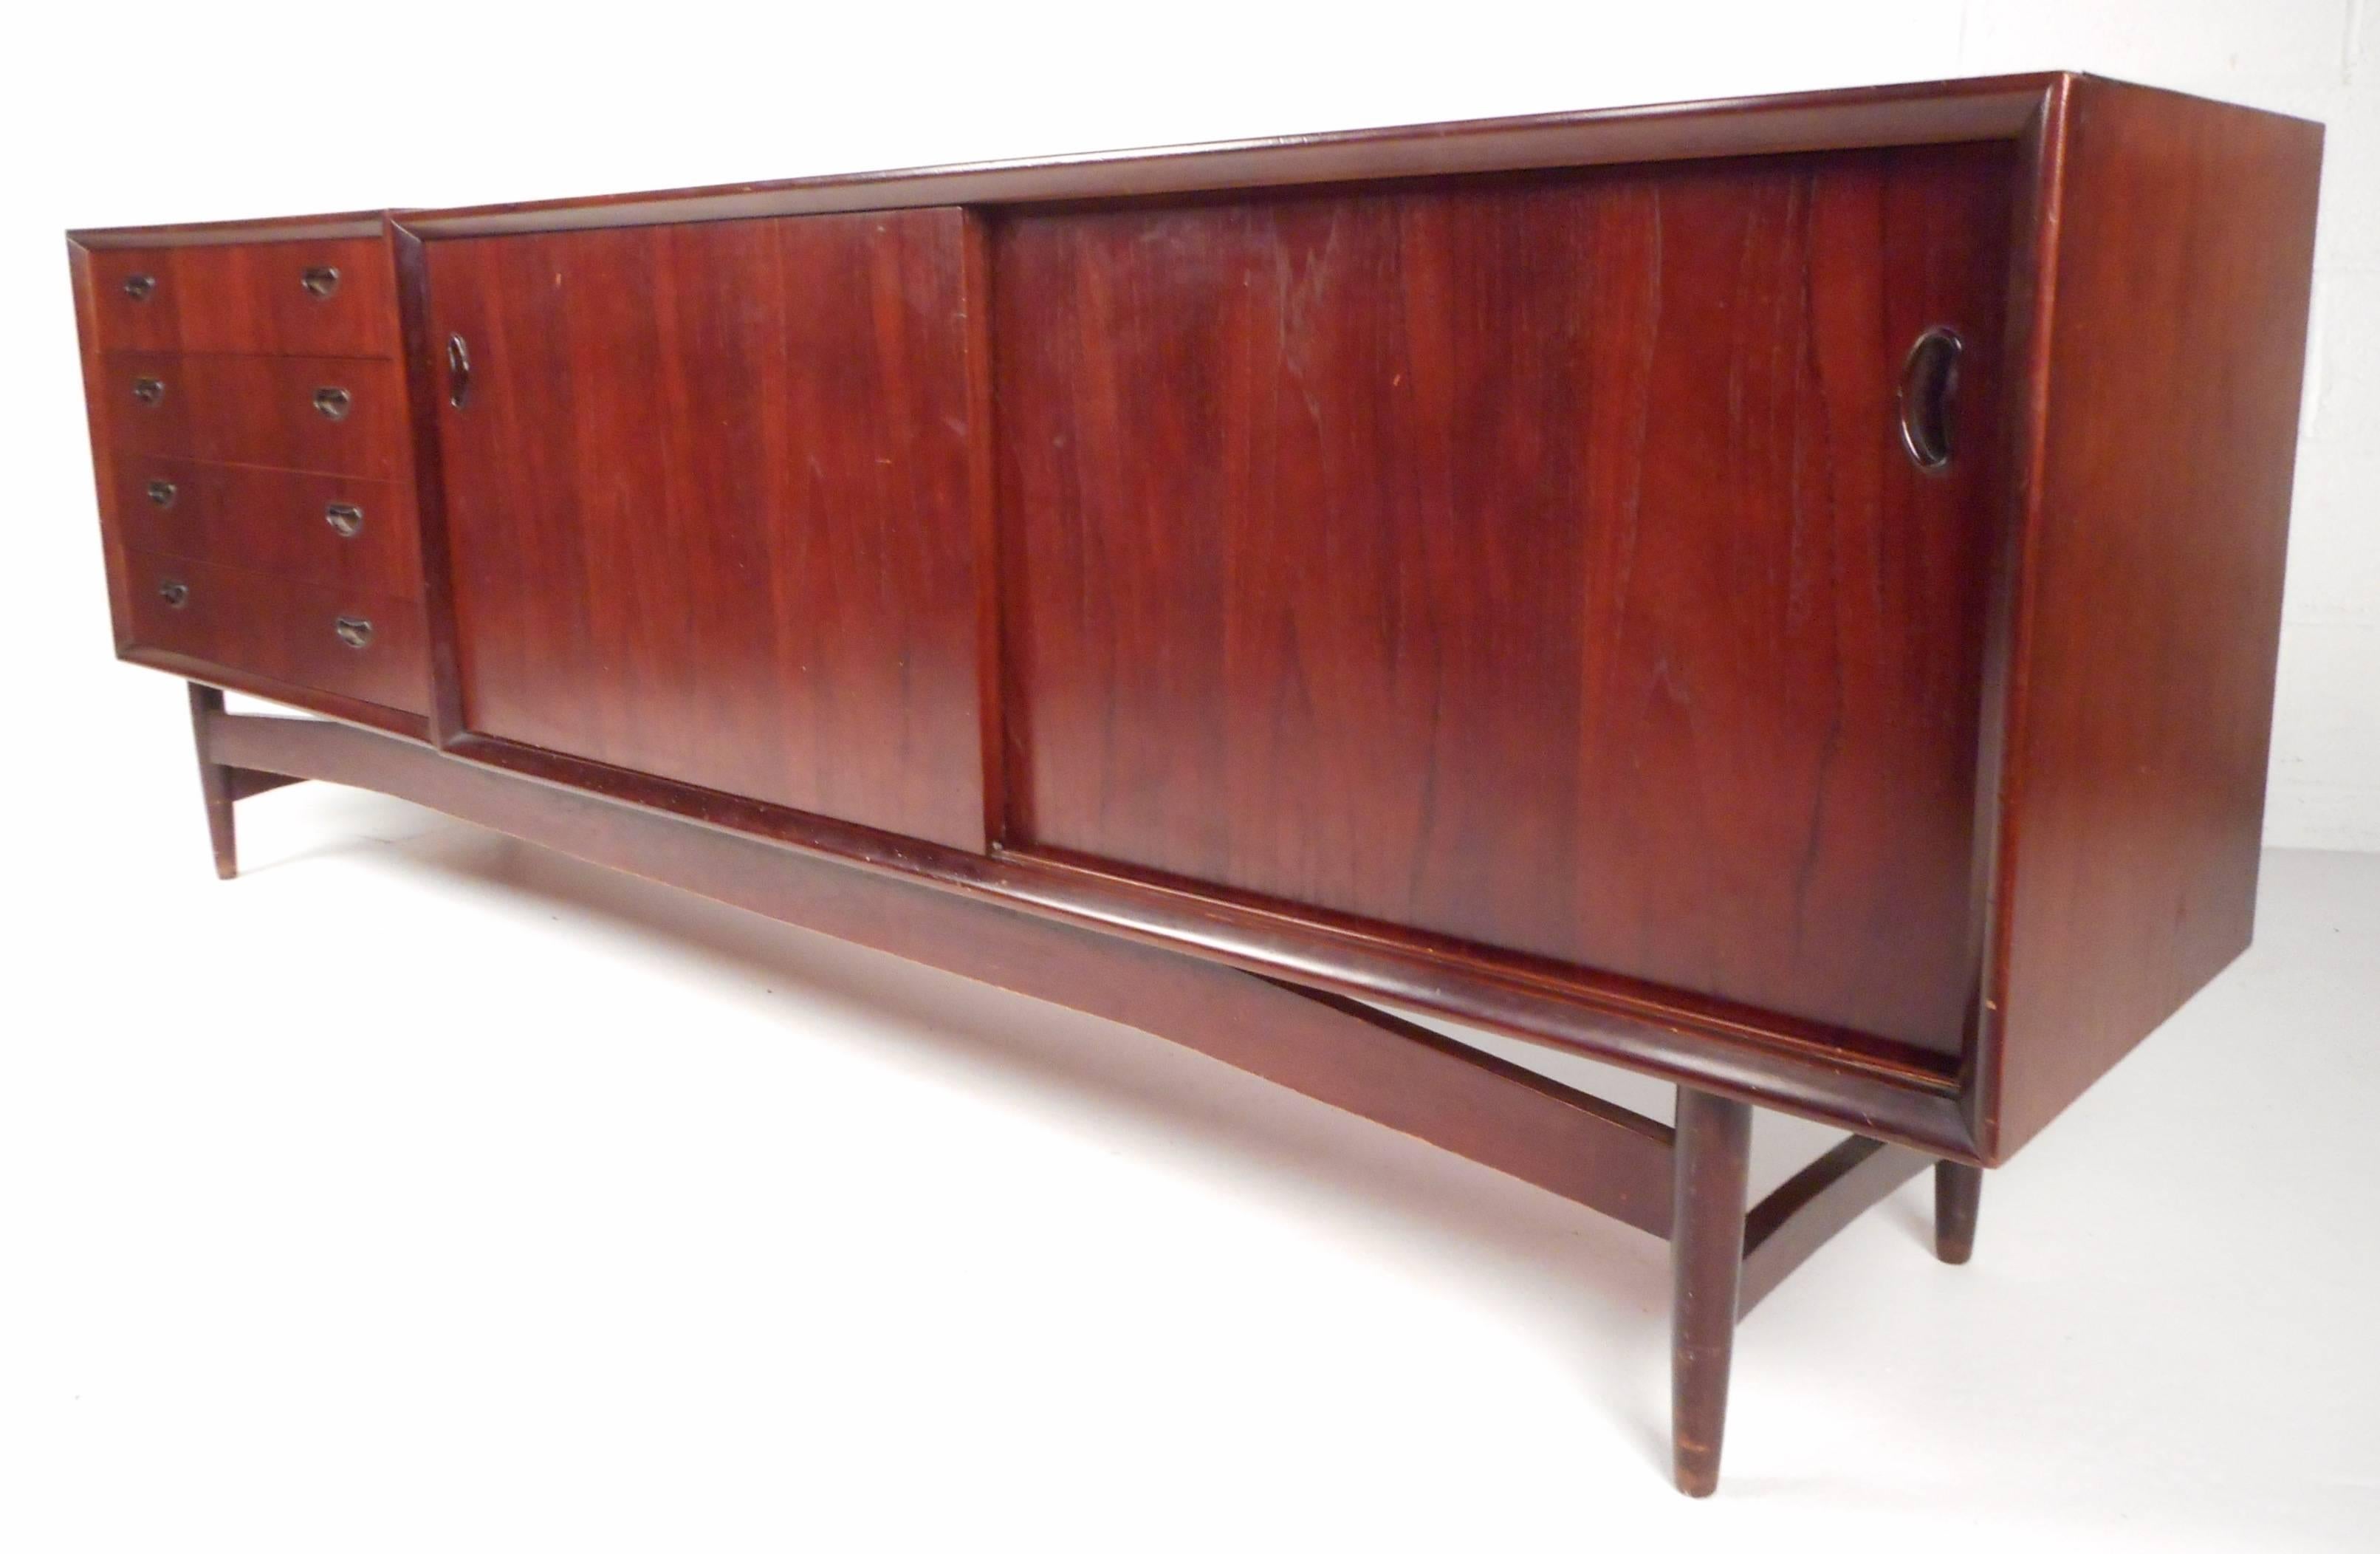 Impressive mid-century vintage sideboard features two separate pieces that sit comfortably on top of a sculpted base with tapered legs. Sleek design with unique carved pulls, a finished back, and gorgeous wood grain. Plenty of storage space in the